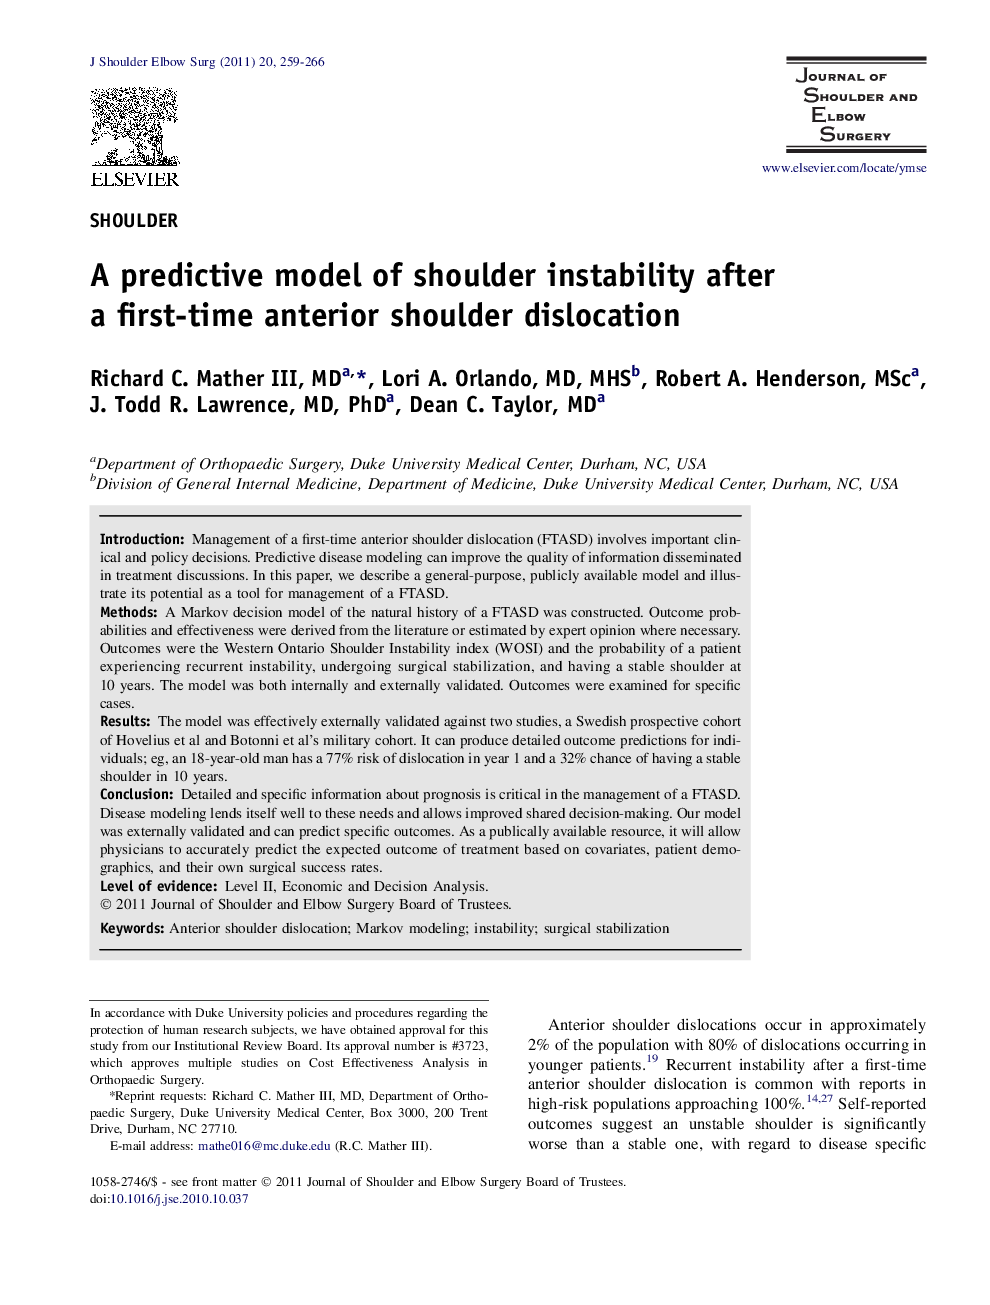 A predictive model of shoulder instability after a first-time anterior shoulder dislocation 